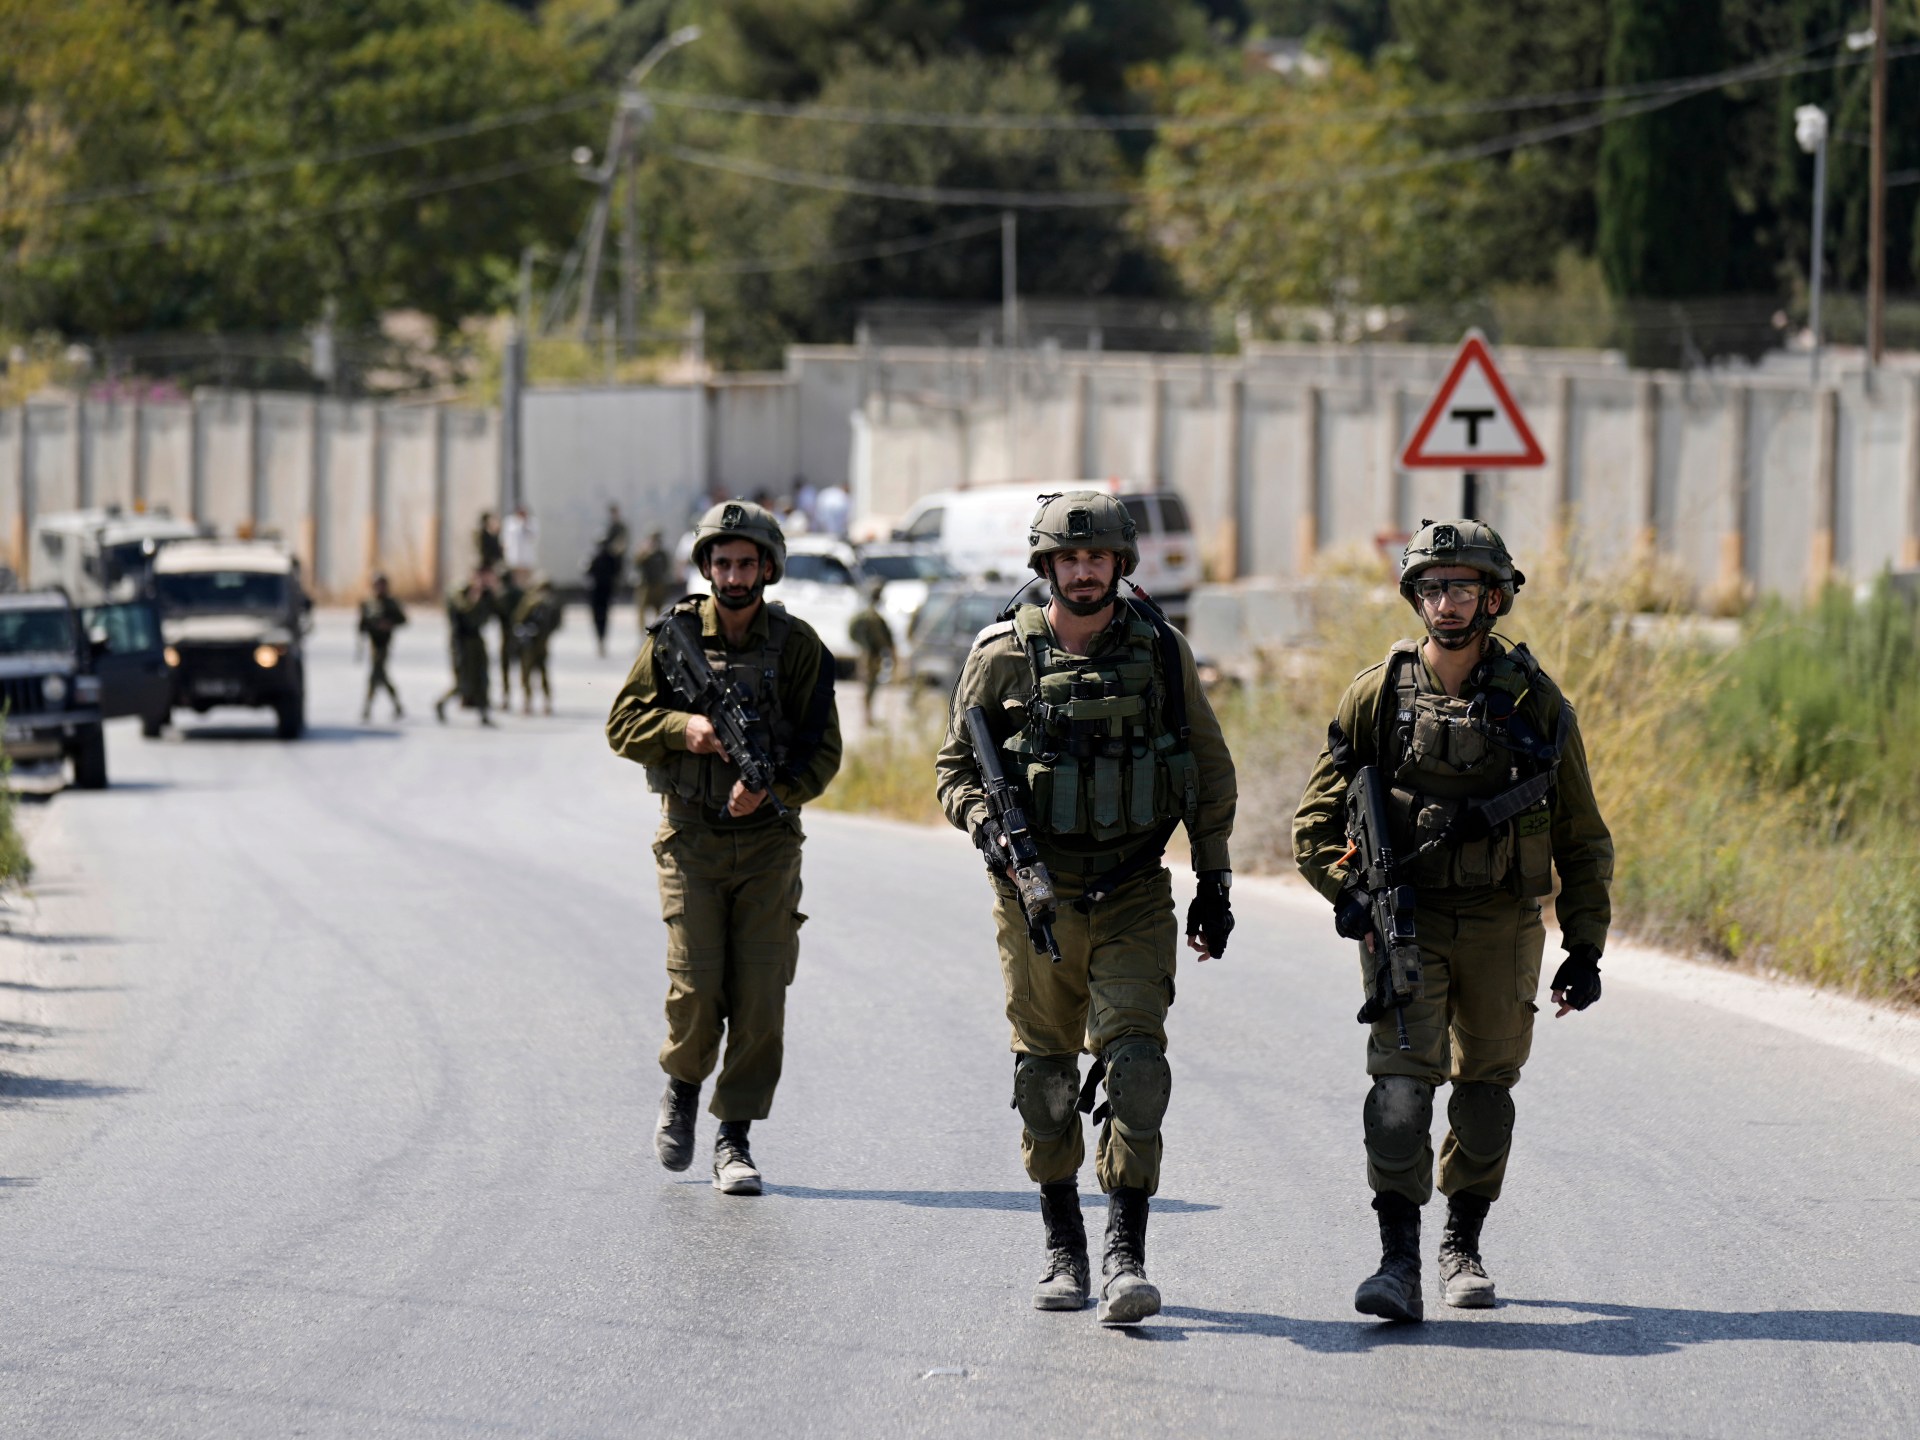 Palestinian fighters kill Israeli soldier in occupied West Bank